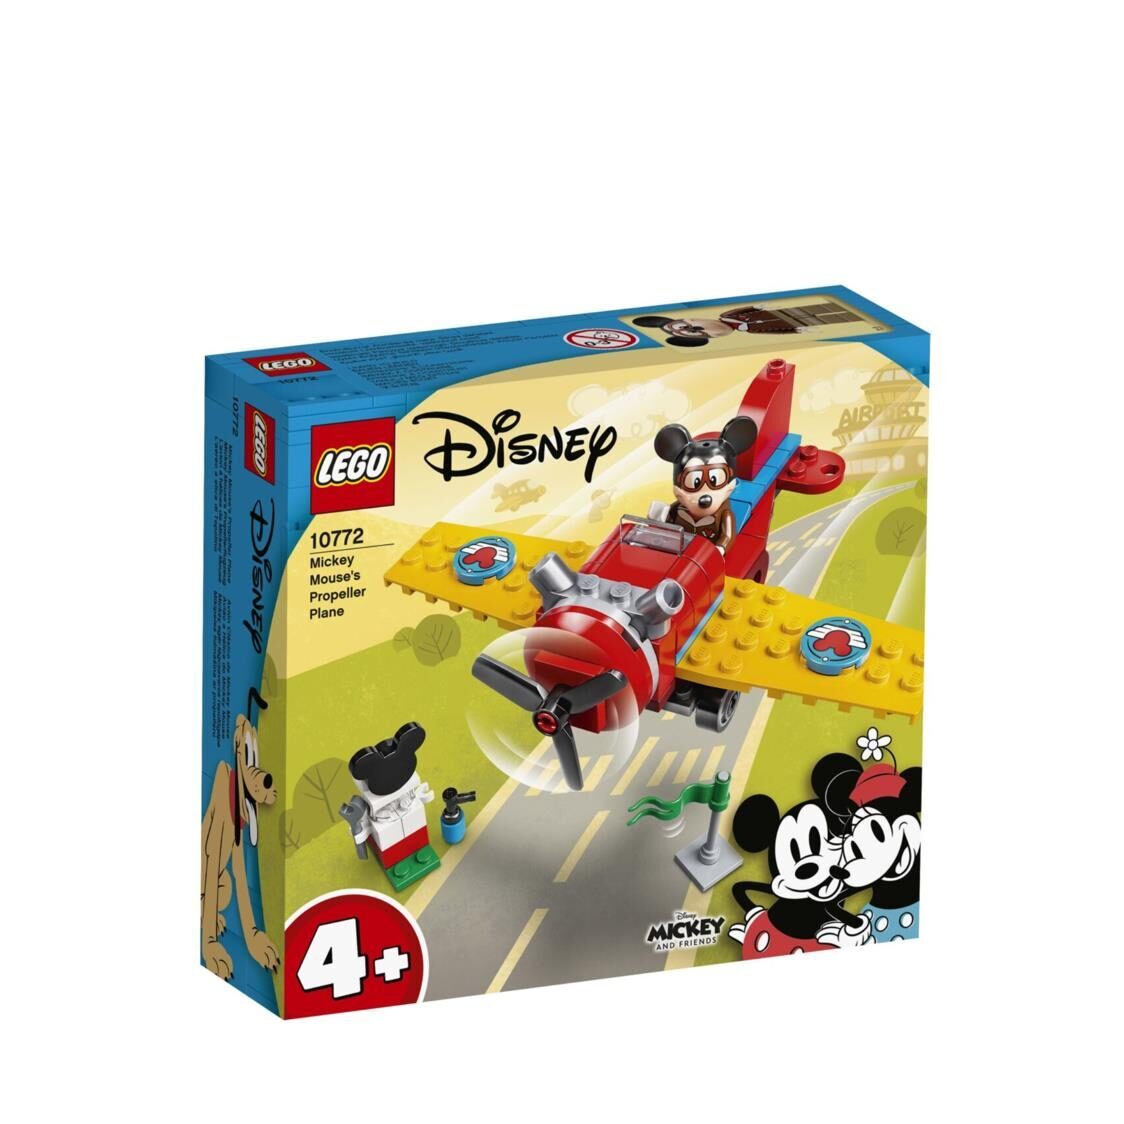 LEGO Mickey and Friends - Mickey Mouses Propeller Plane 10772